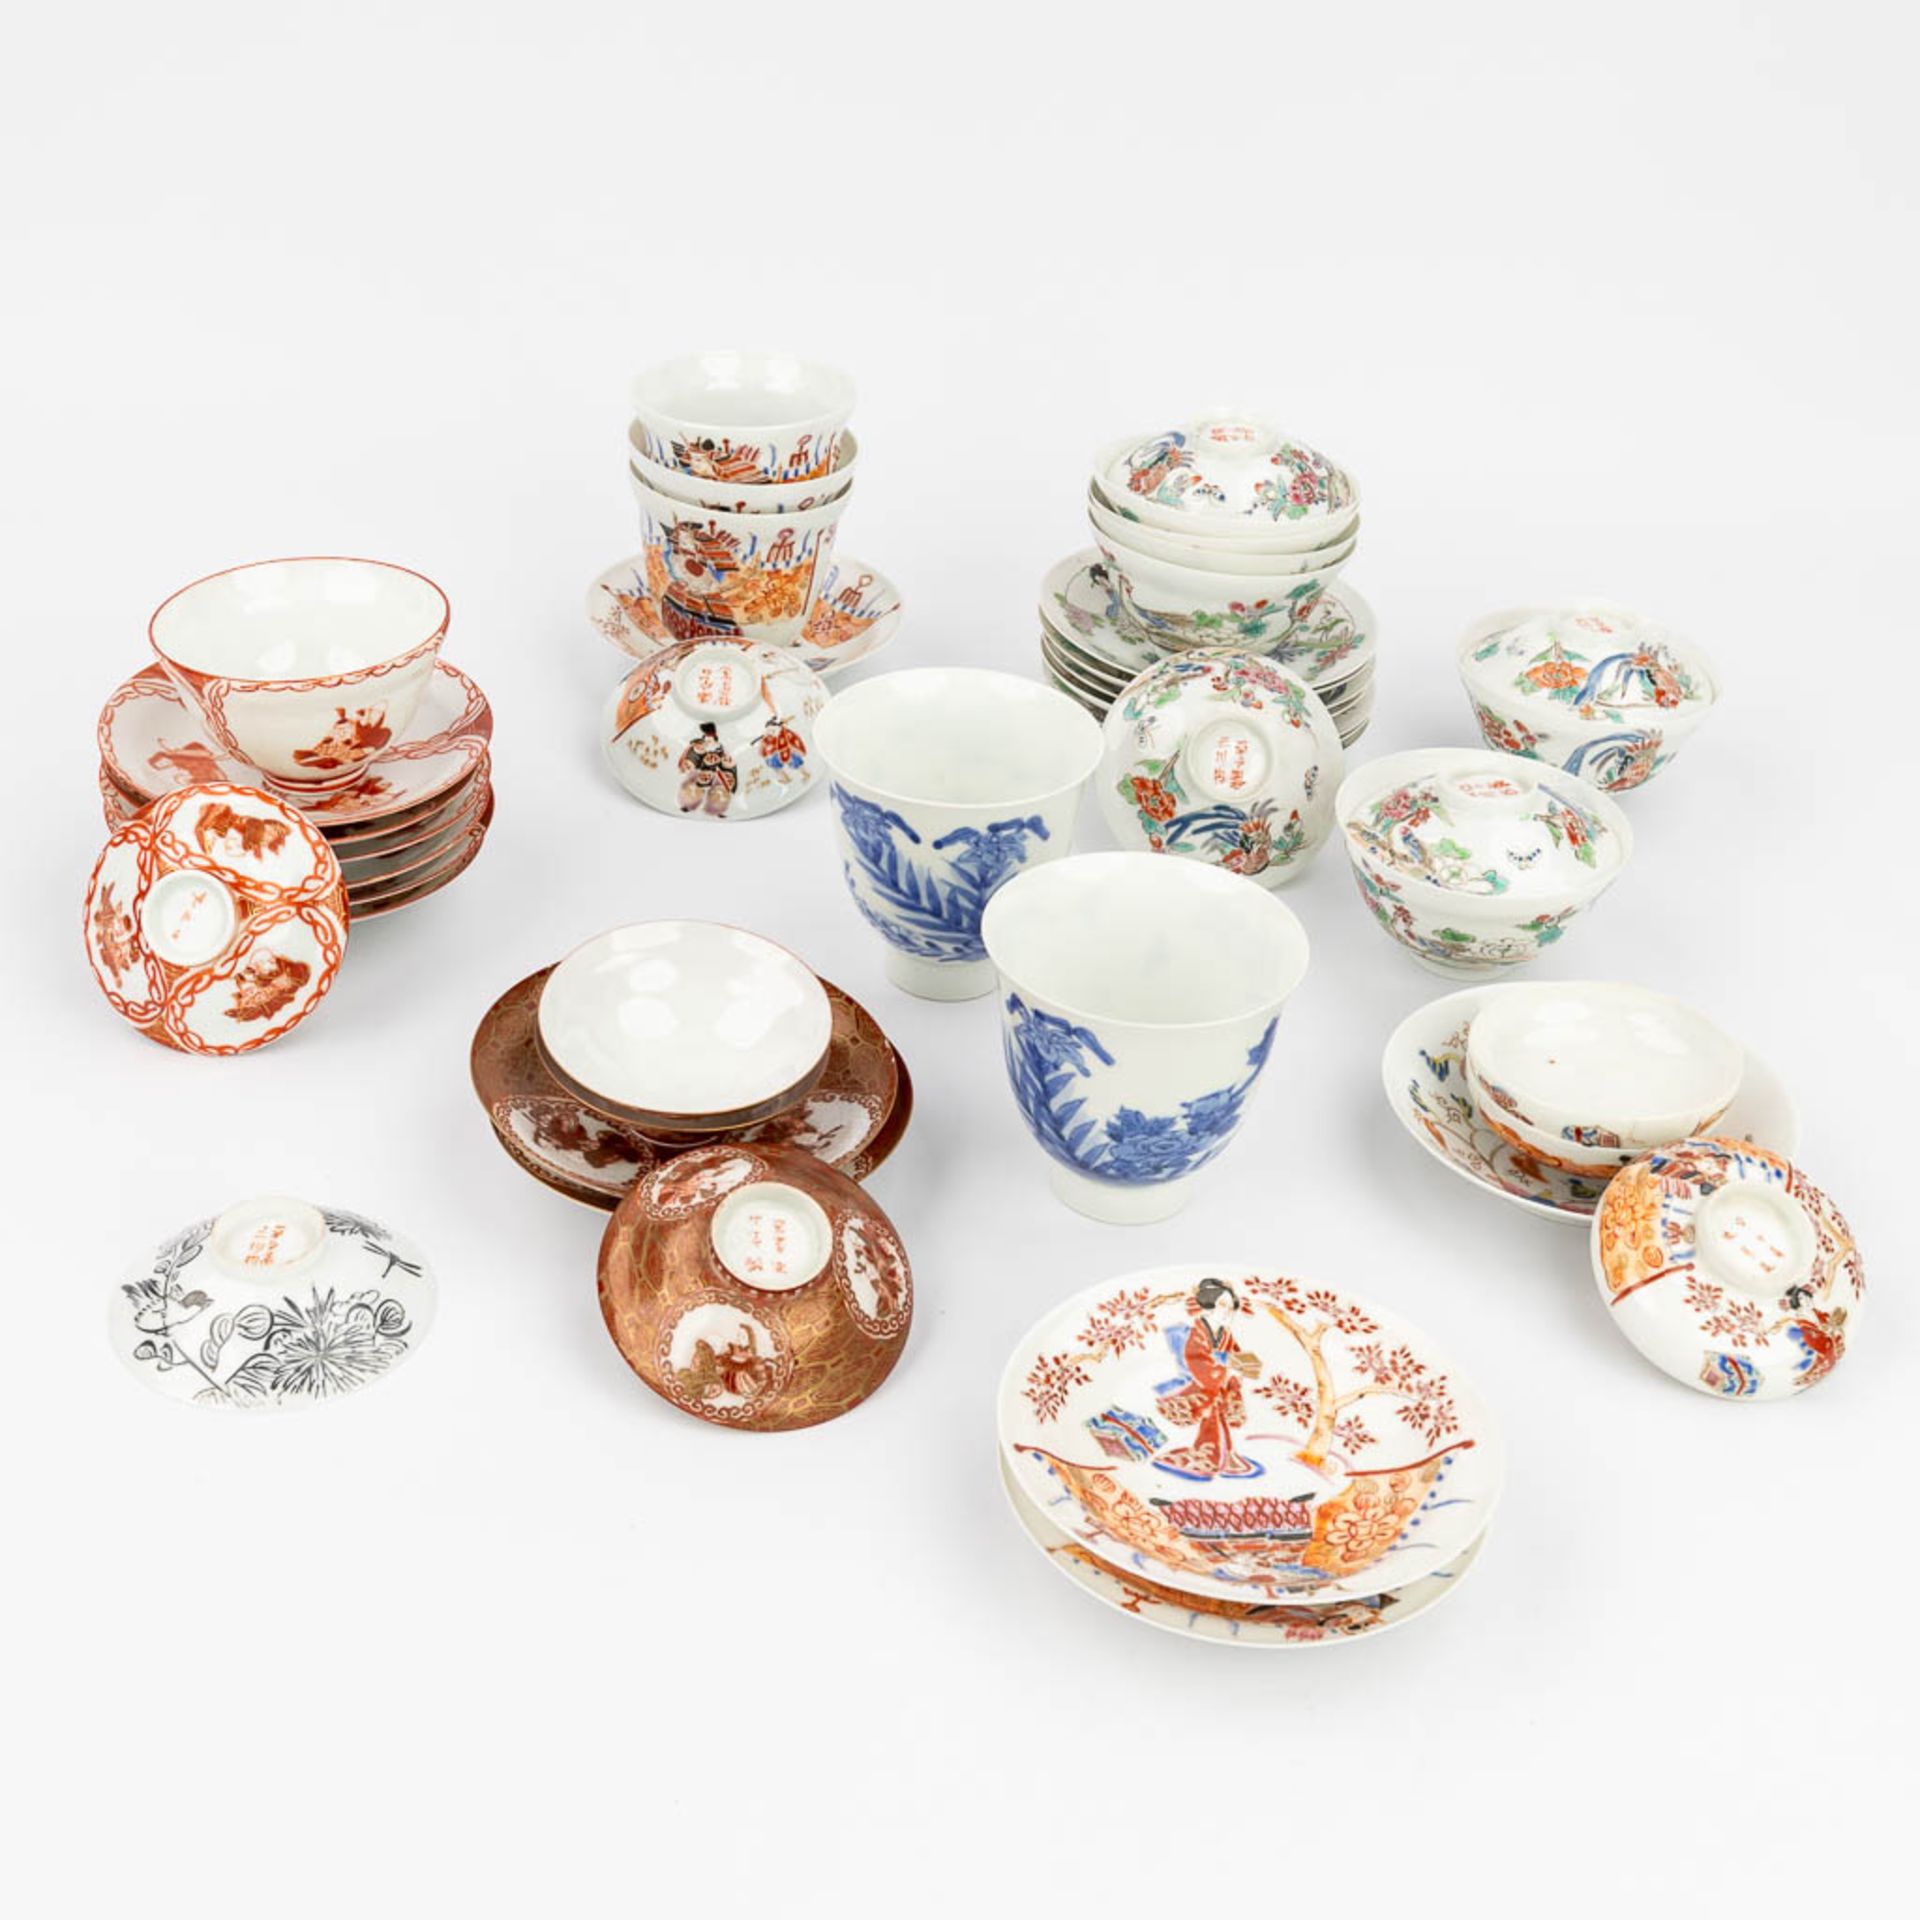 A large collection of bowls and saucers, eggshell porcelain, Japan, 20th C. (H:9 x D:9 cm)